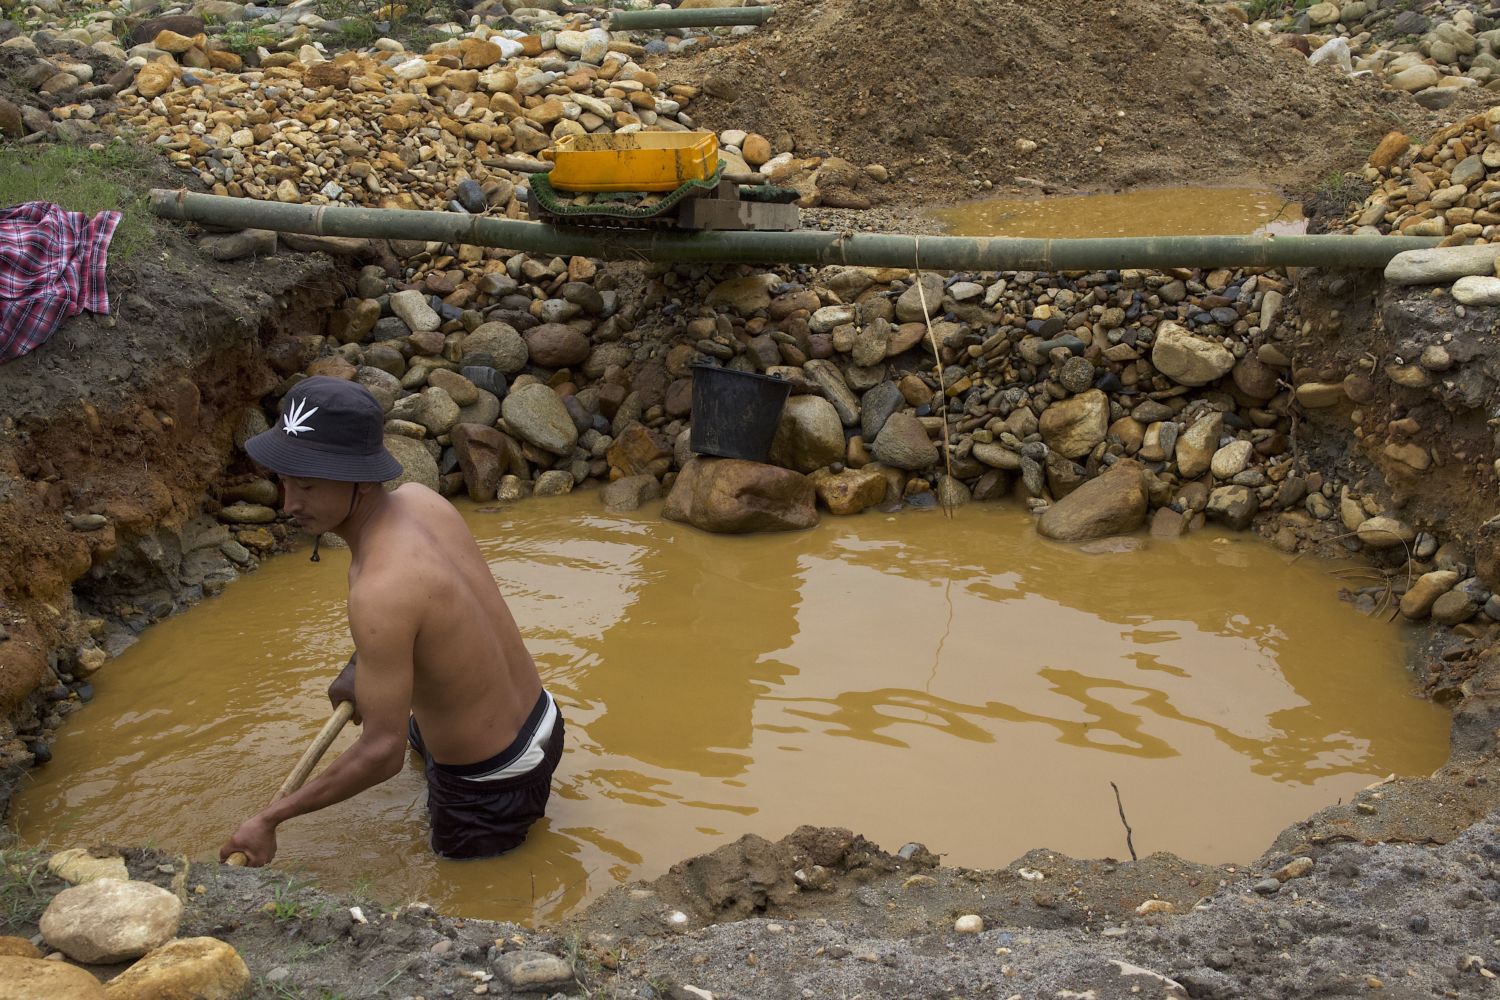 In the Wake of Coup, Gold Mining Boom Is Ravaging Myanmar - Yale E360